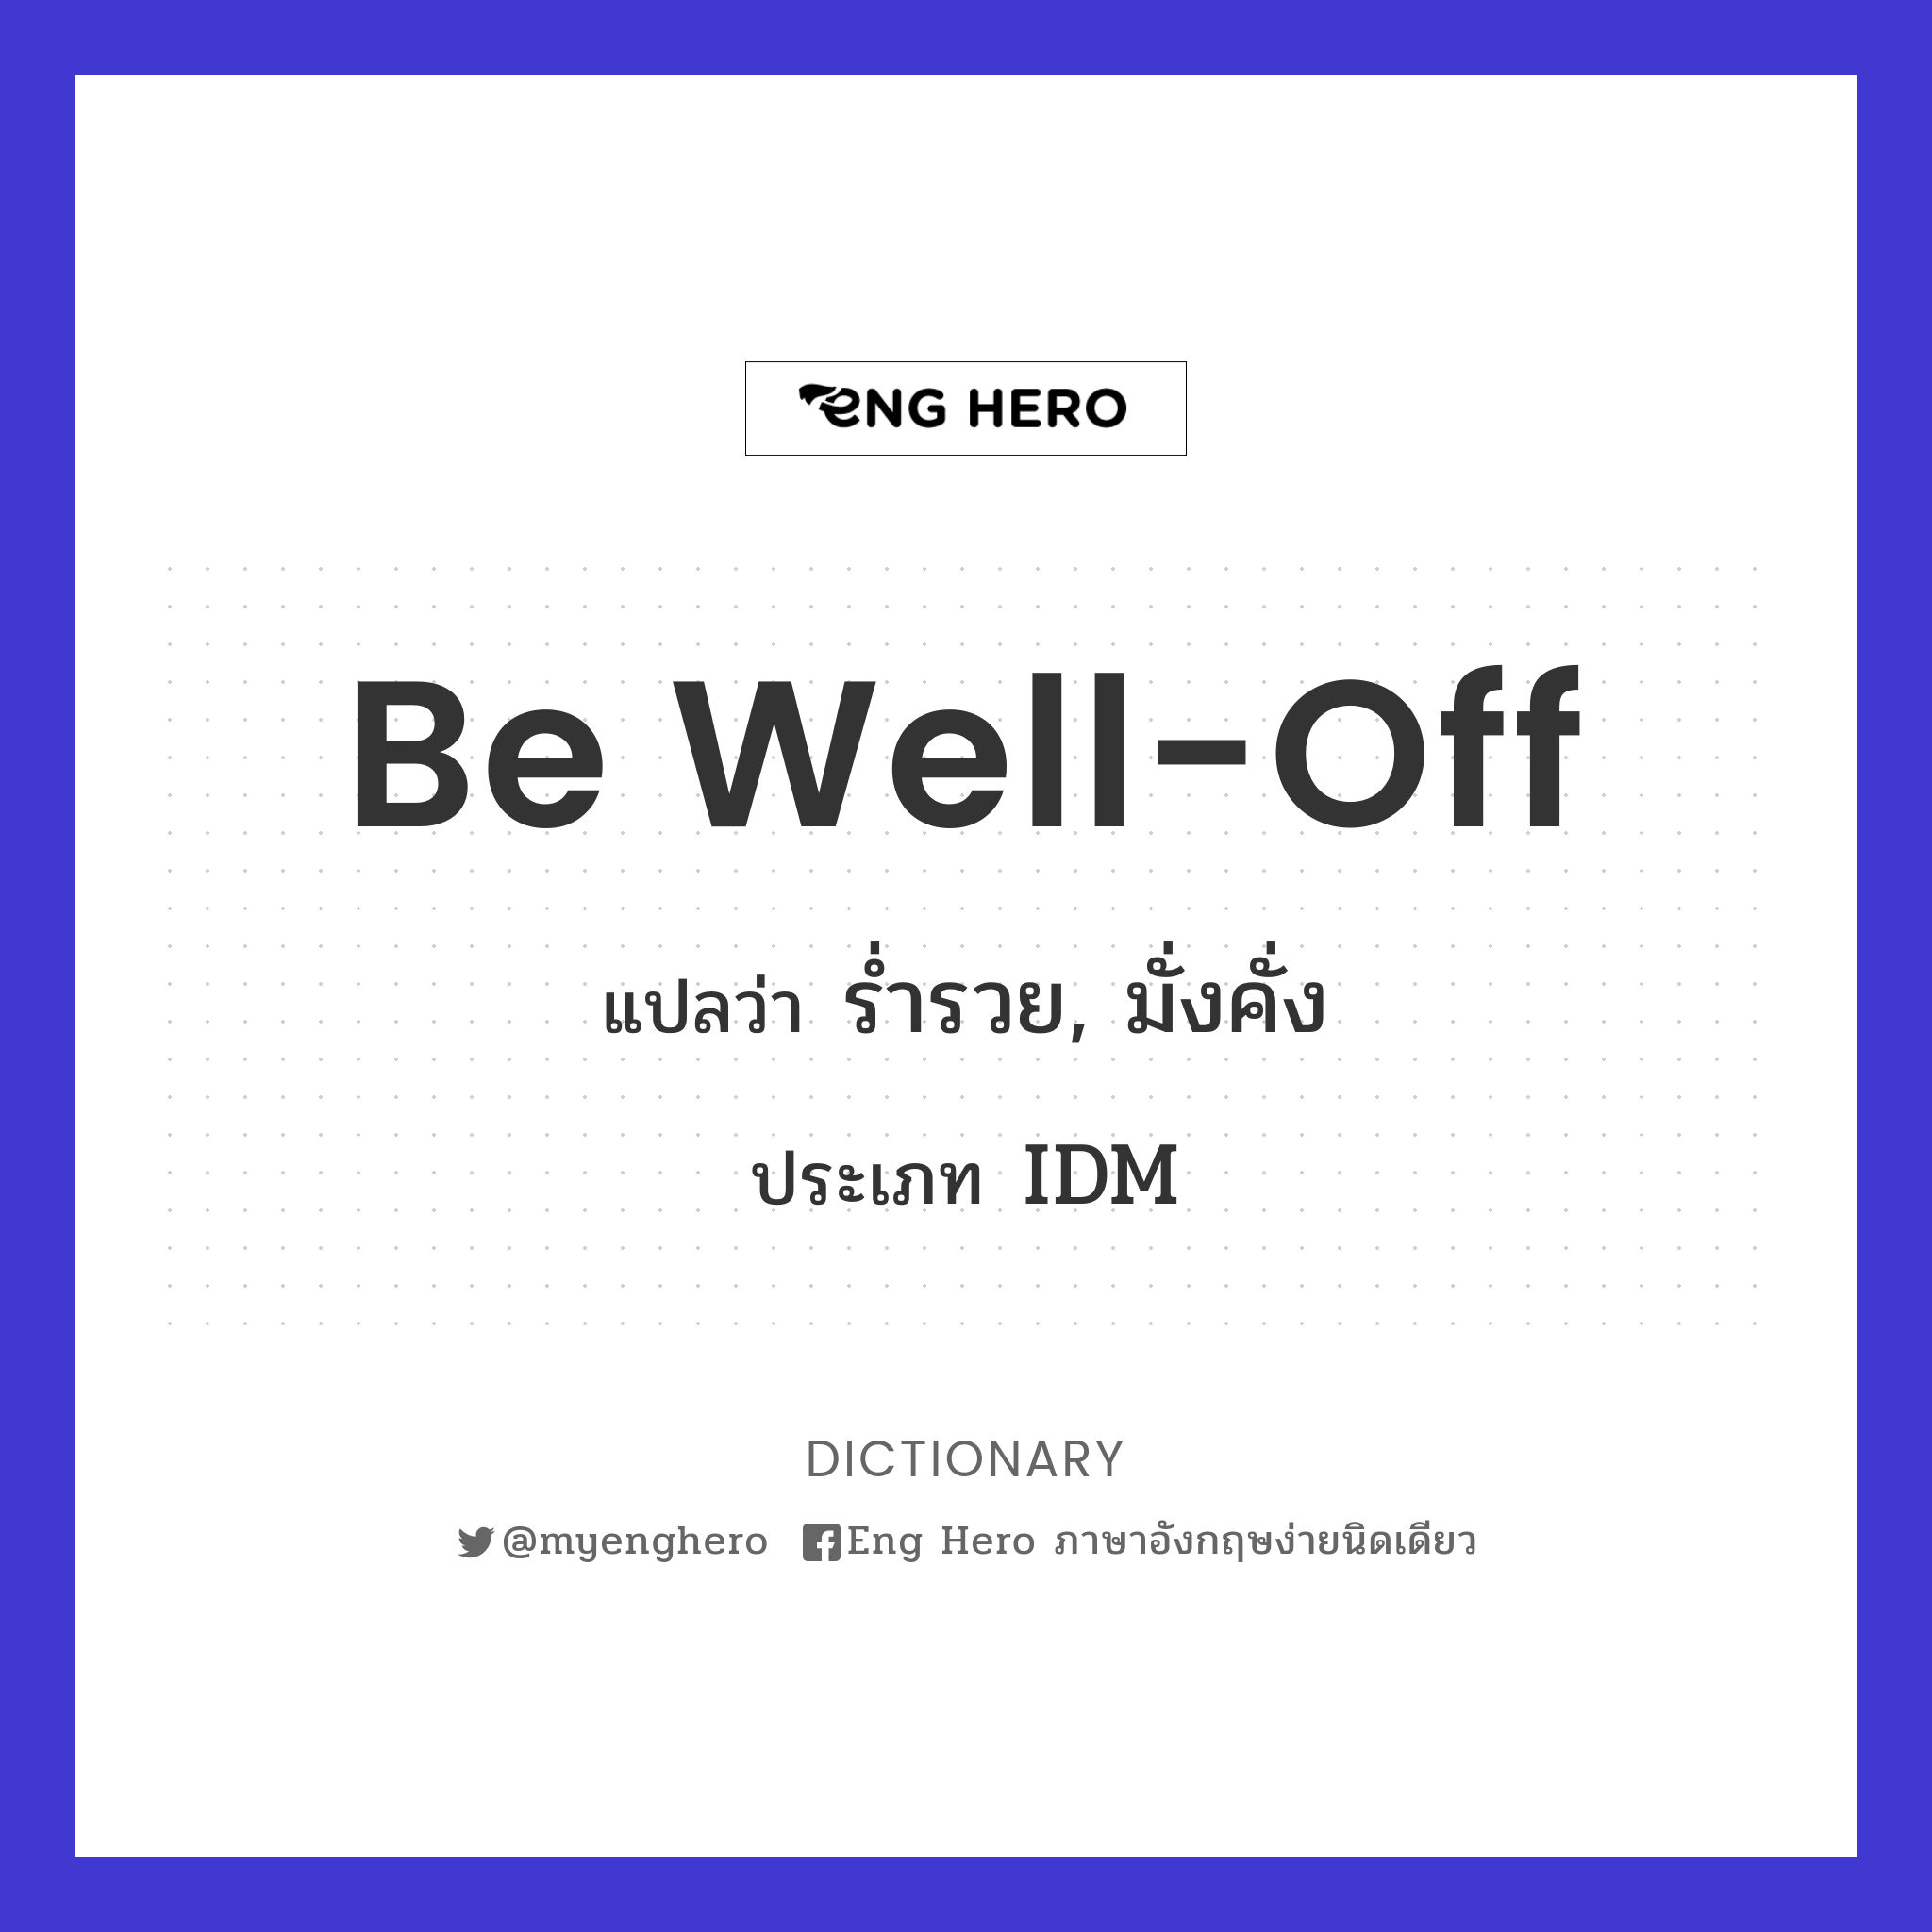 be well-off